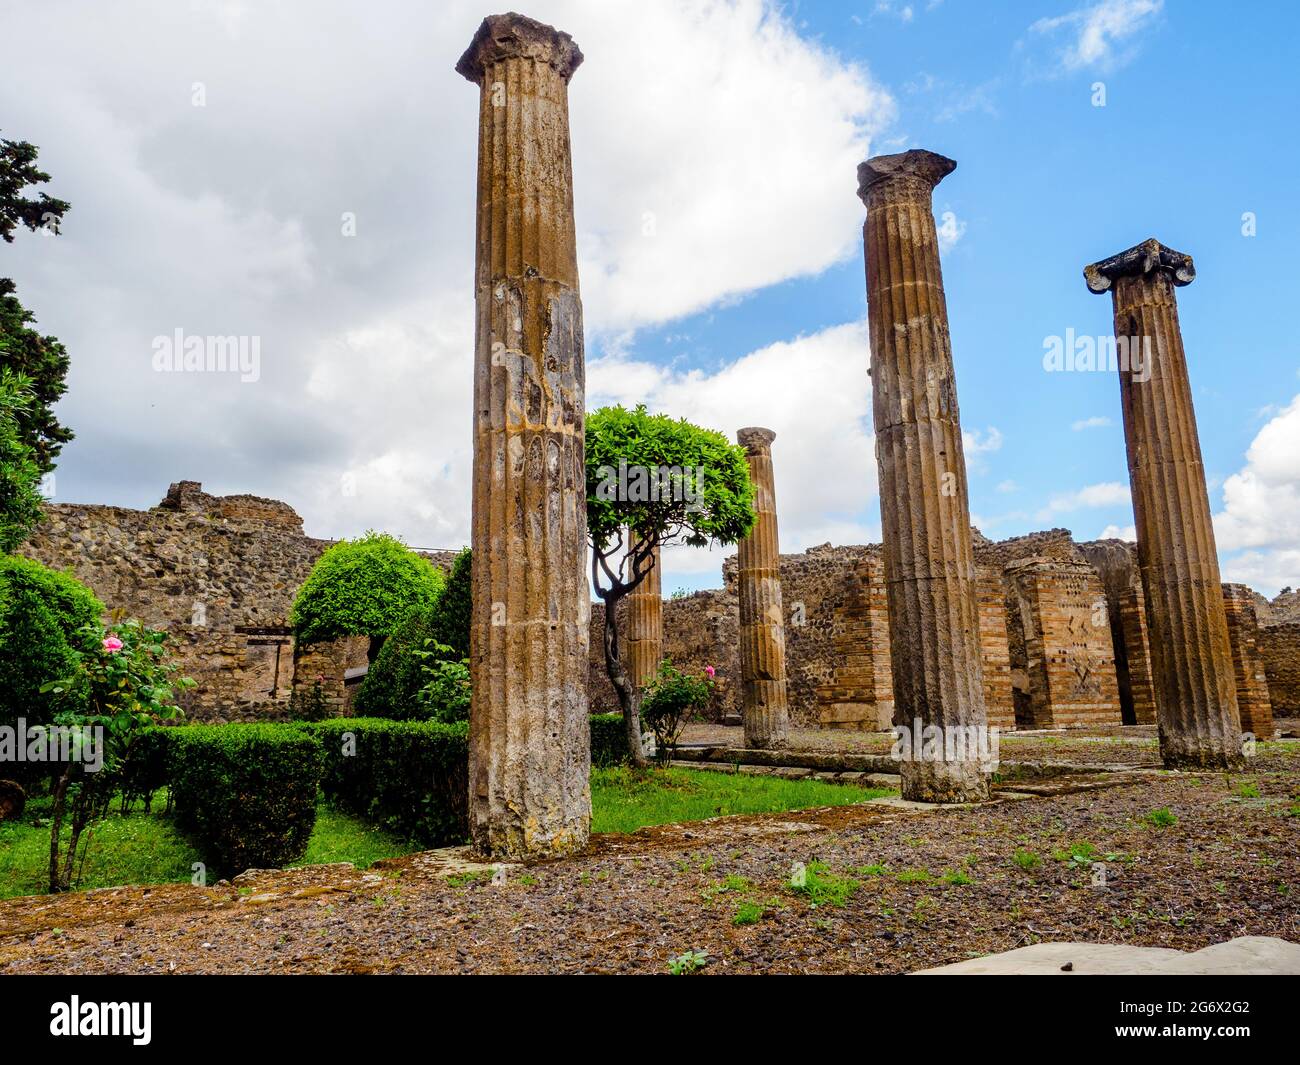 Columns in the house of the Cornelius Family  - Pompeii archaeological site, Italy Stock Photo